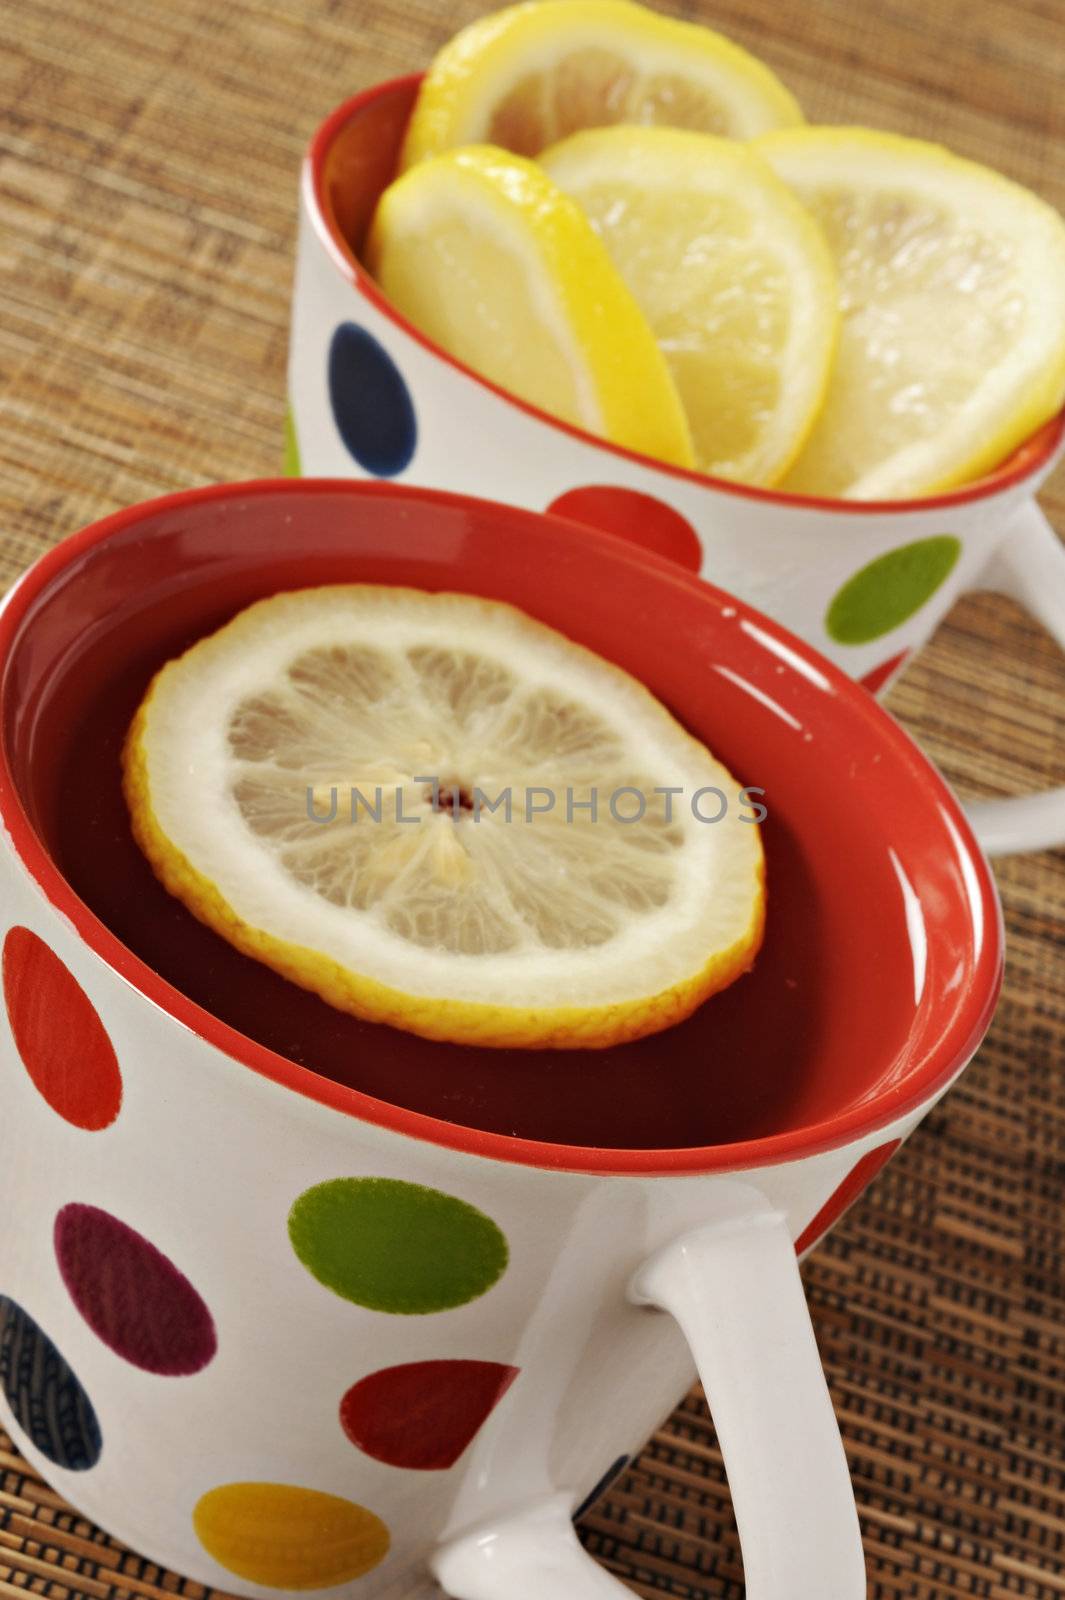 Tea with lemon in polka dot cups by tish1